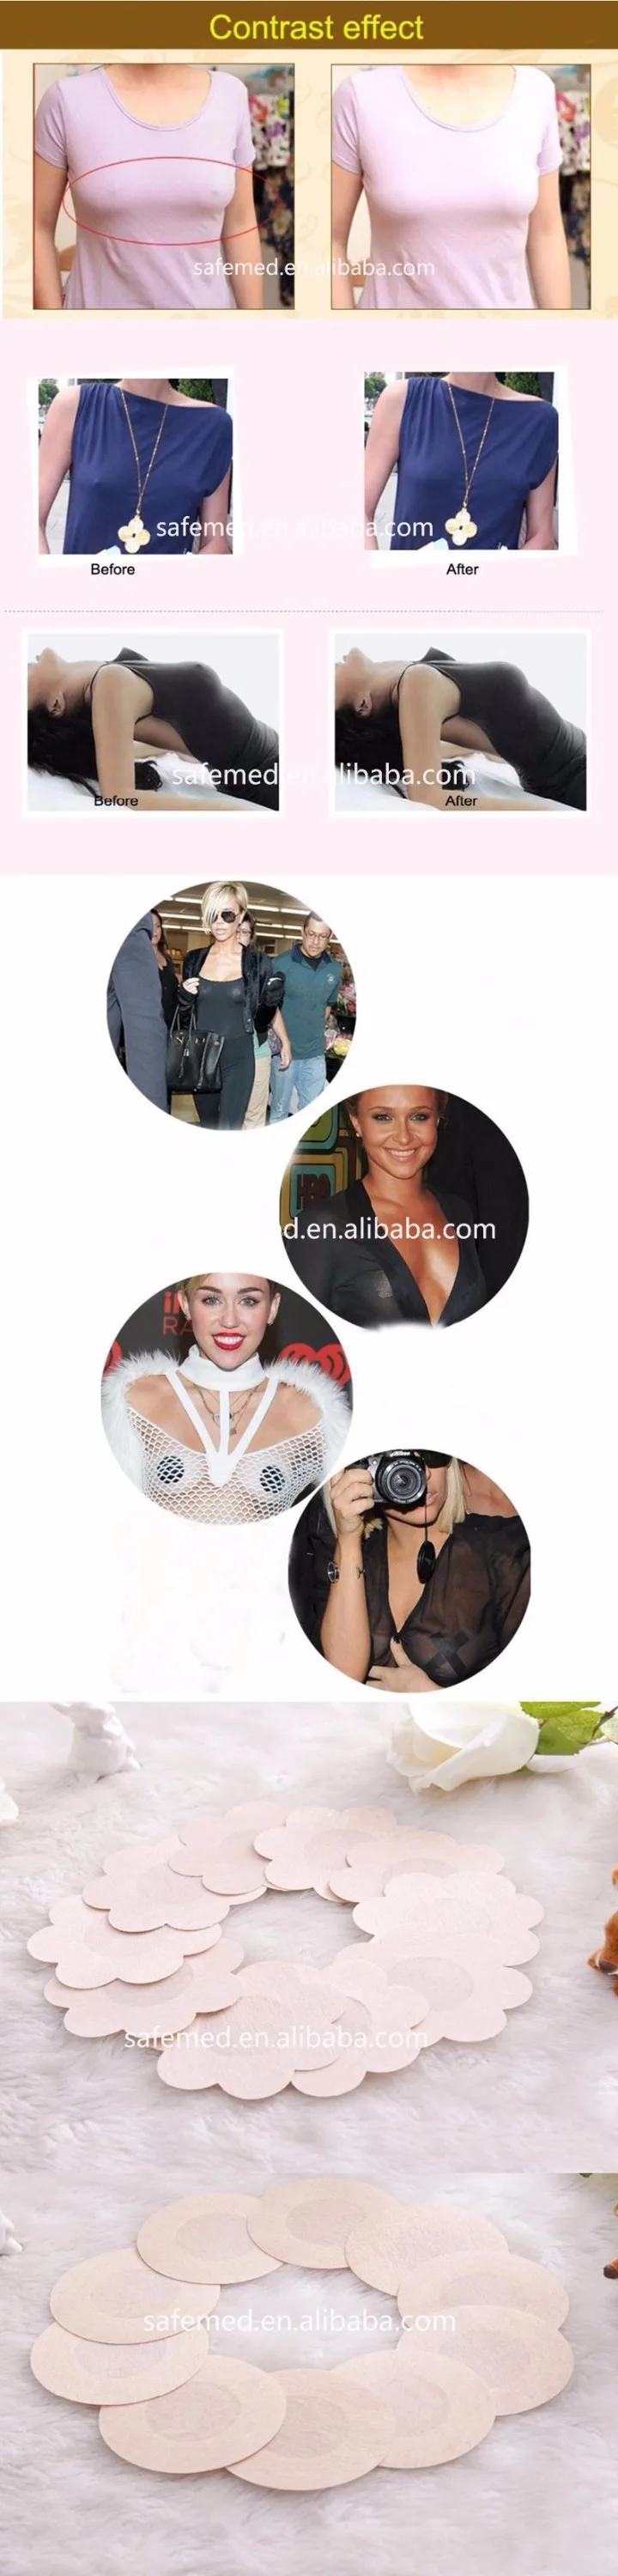 Hot Sale Fashion Nipple Cover Beauty Girl Nipple Covers Sexy Ladies